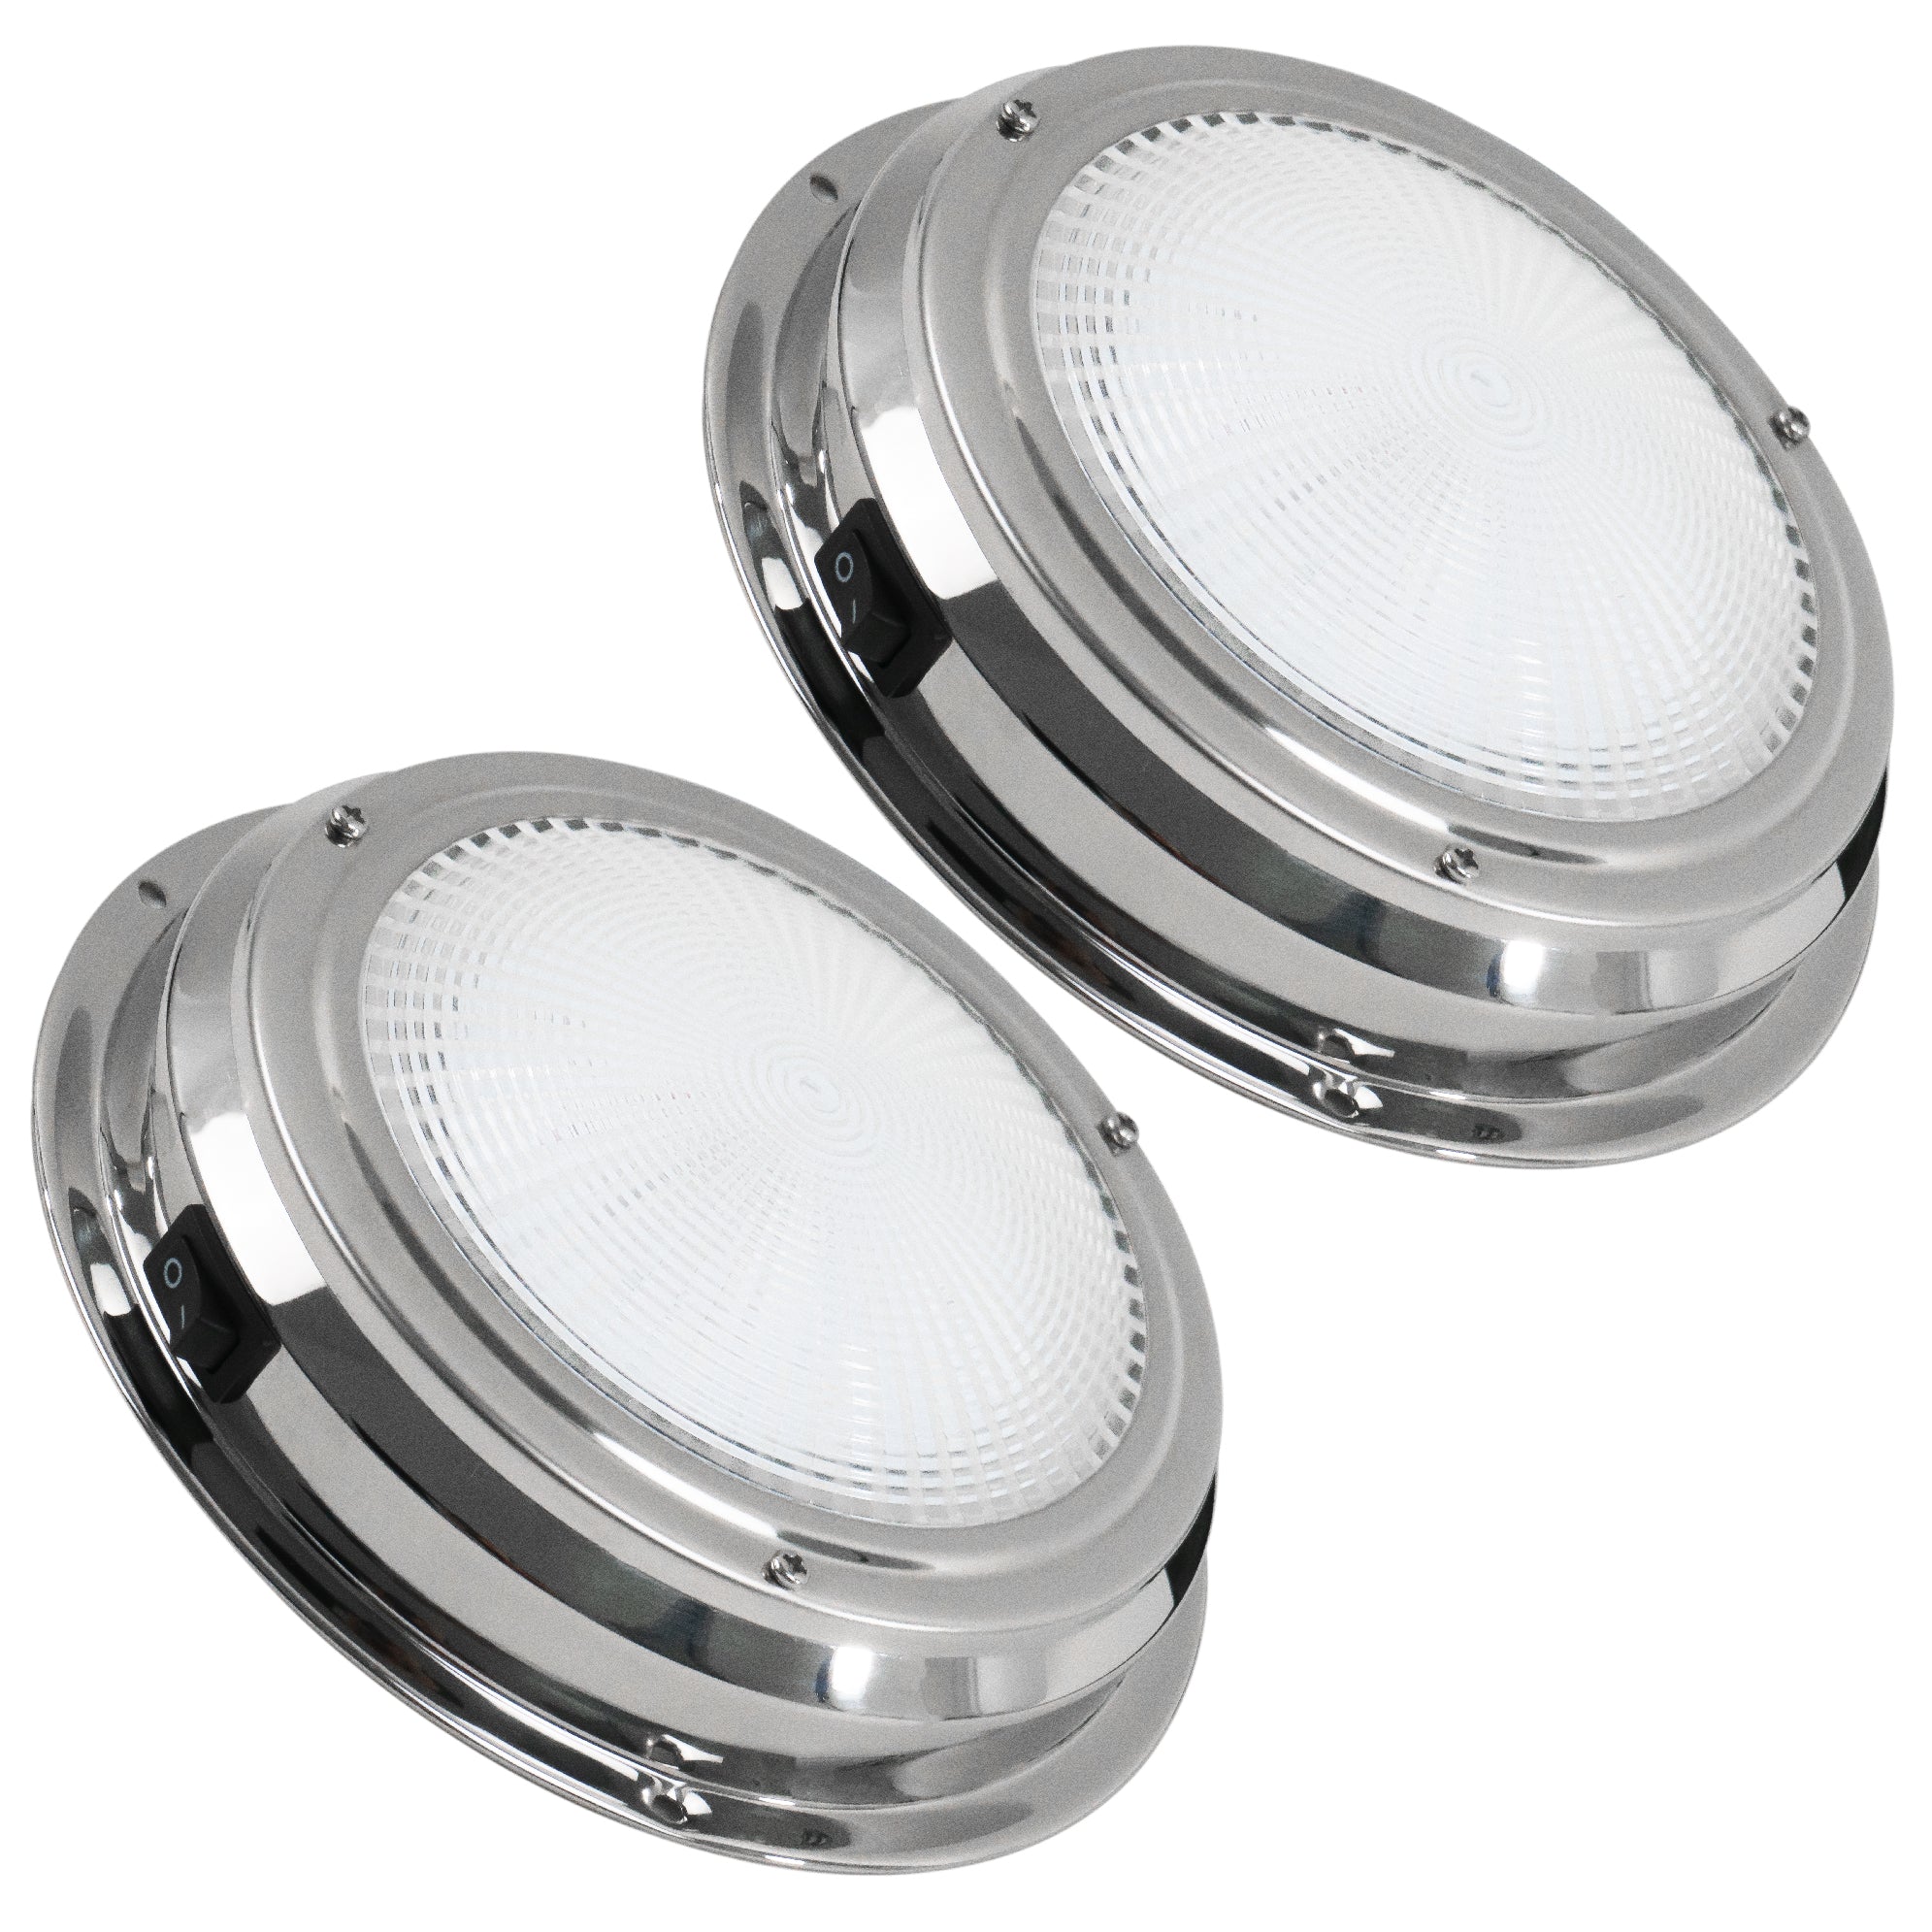 LED Interior Dome Ceiling Light, 6" Surface Mount, Daylight White, 2-Pack - FO2625-M2